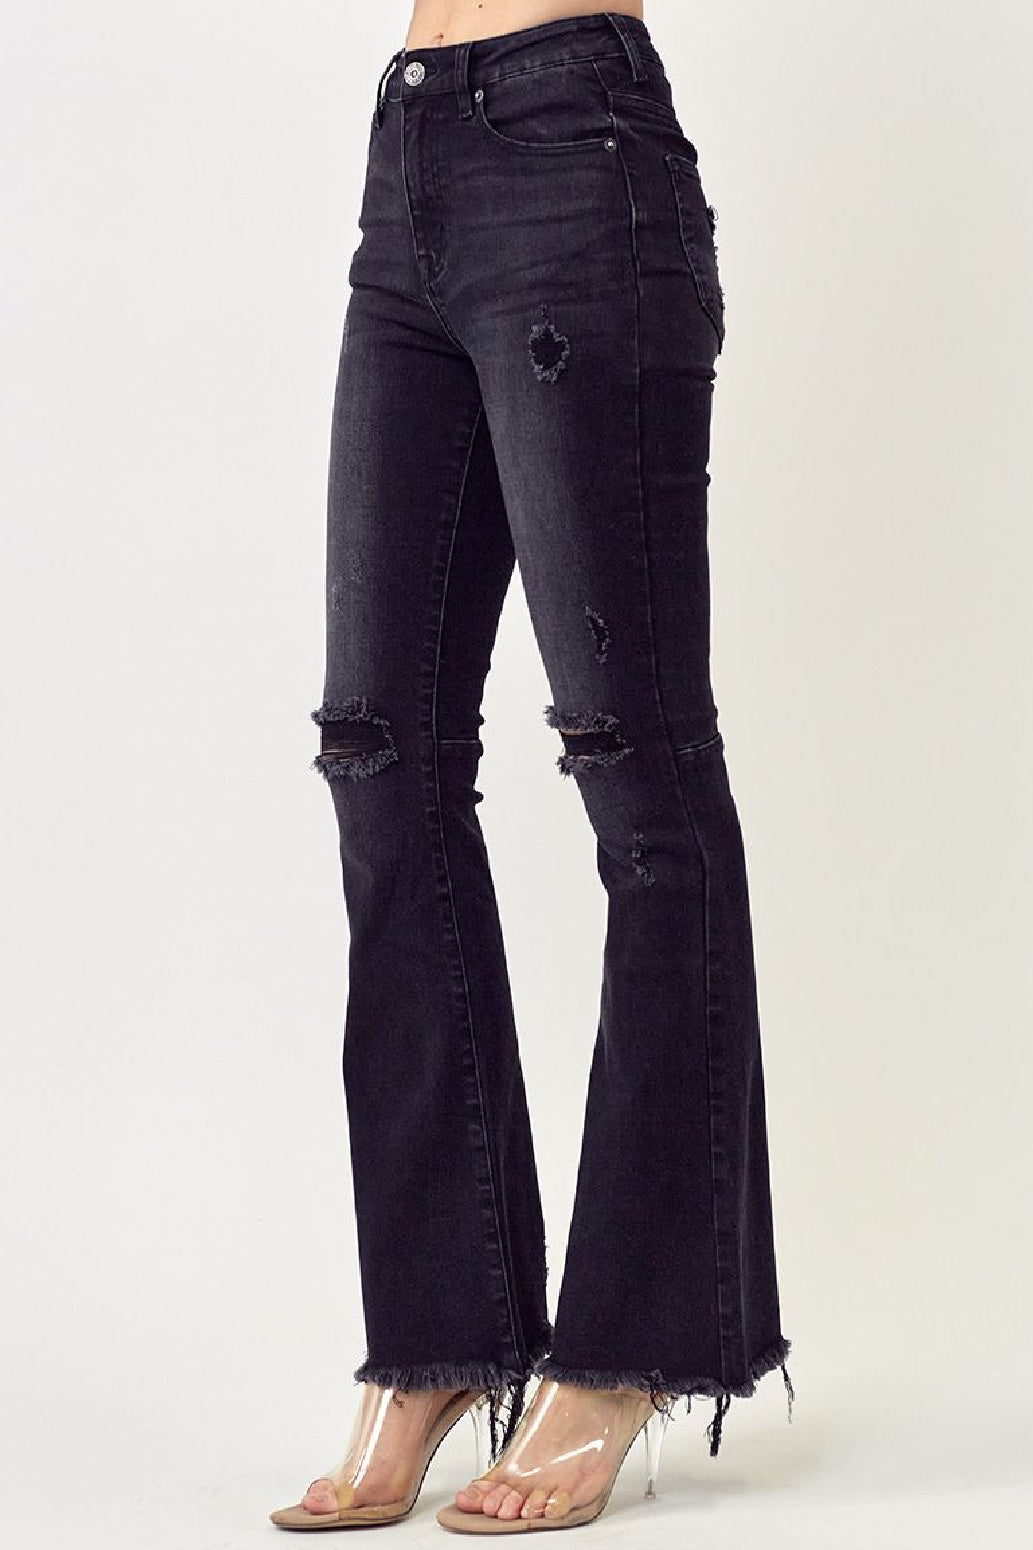 High Rise Flare Distressed Jeans Black - Southern Fashion Boutique Bliss